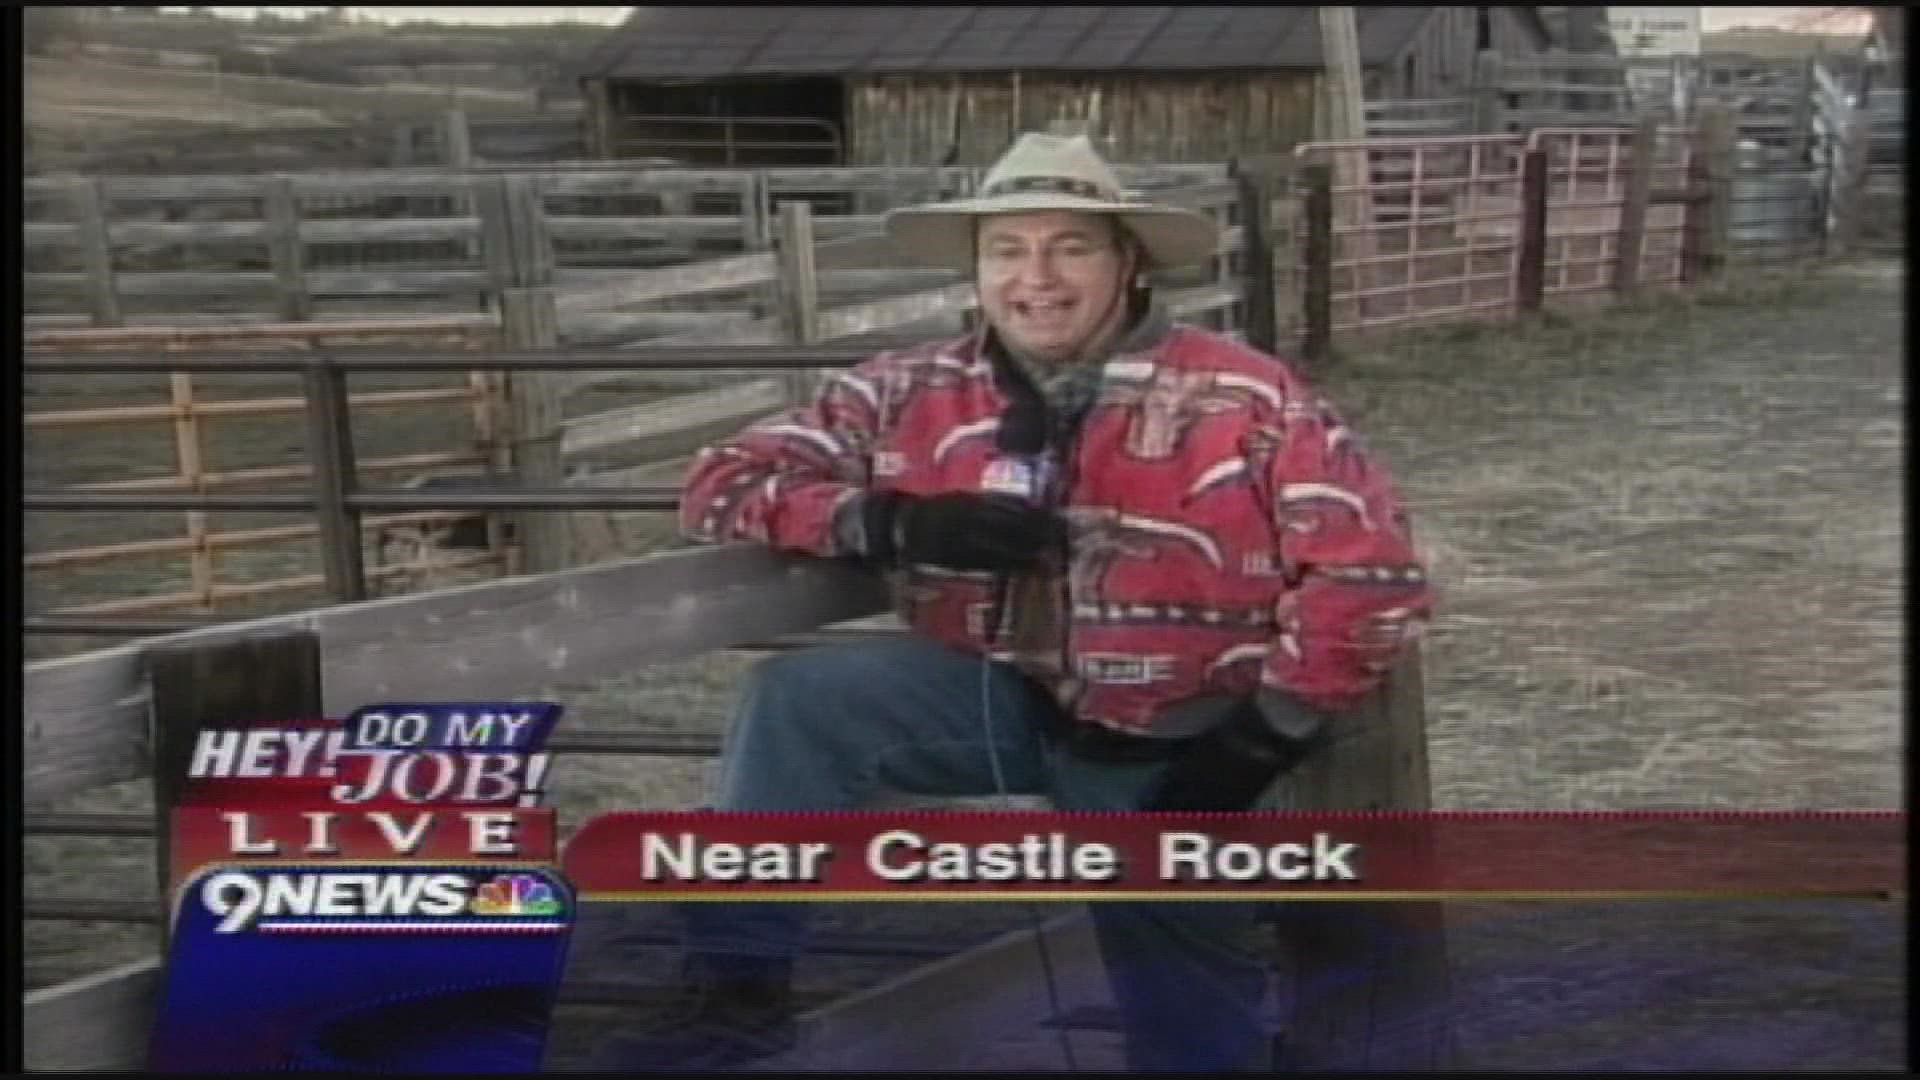 Gary Shapiro looks back at a segment from the early 2000s called "Hey! Do My Job". This time, Gary was a cowboy for a day.